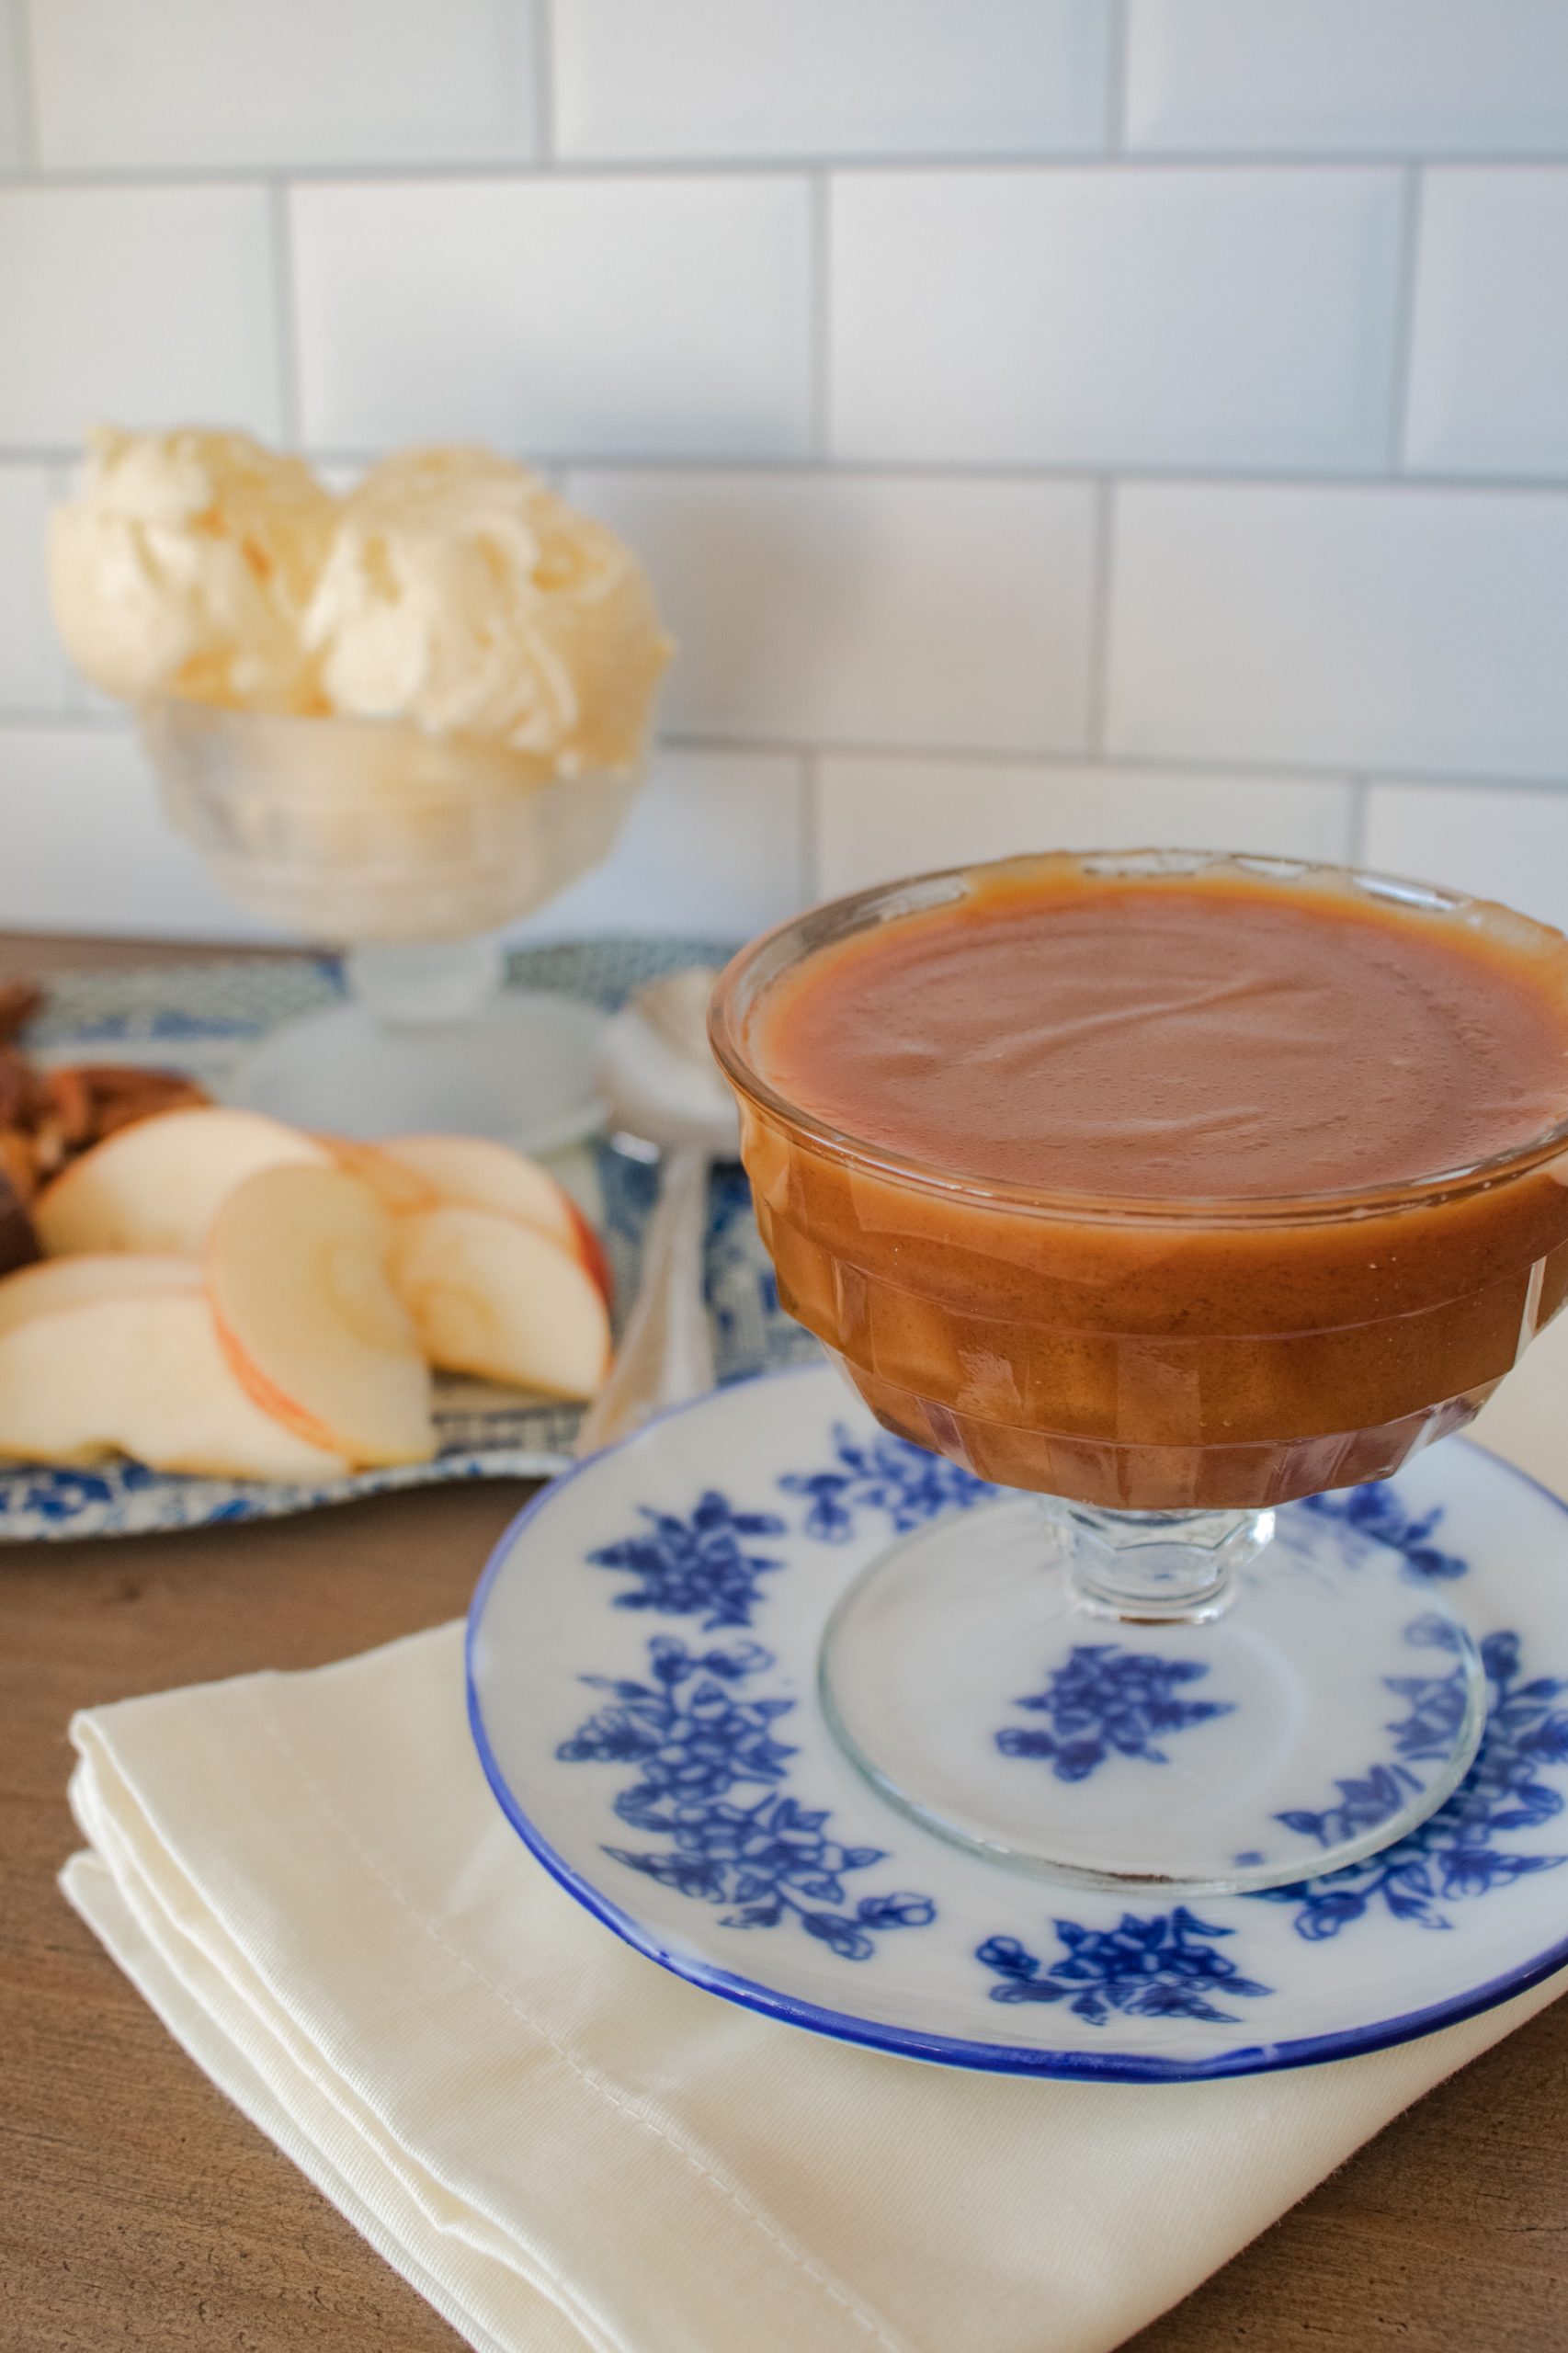 Keto caramel sauce can be used for dipping, topping, and baking.